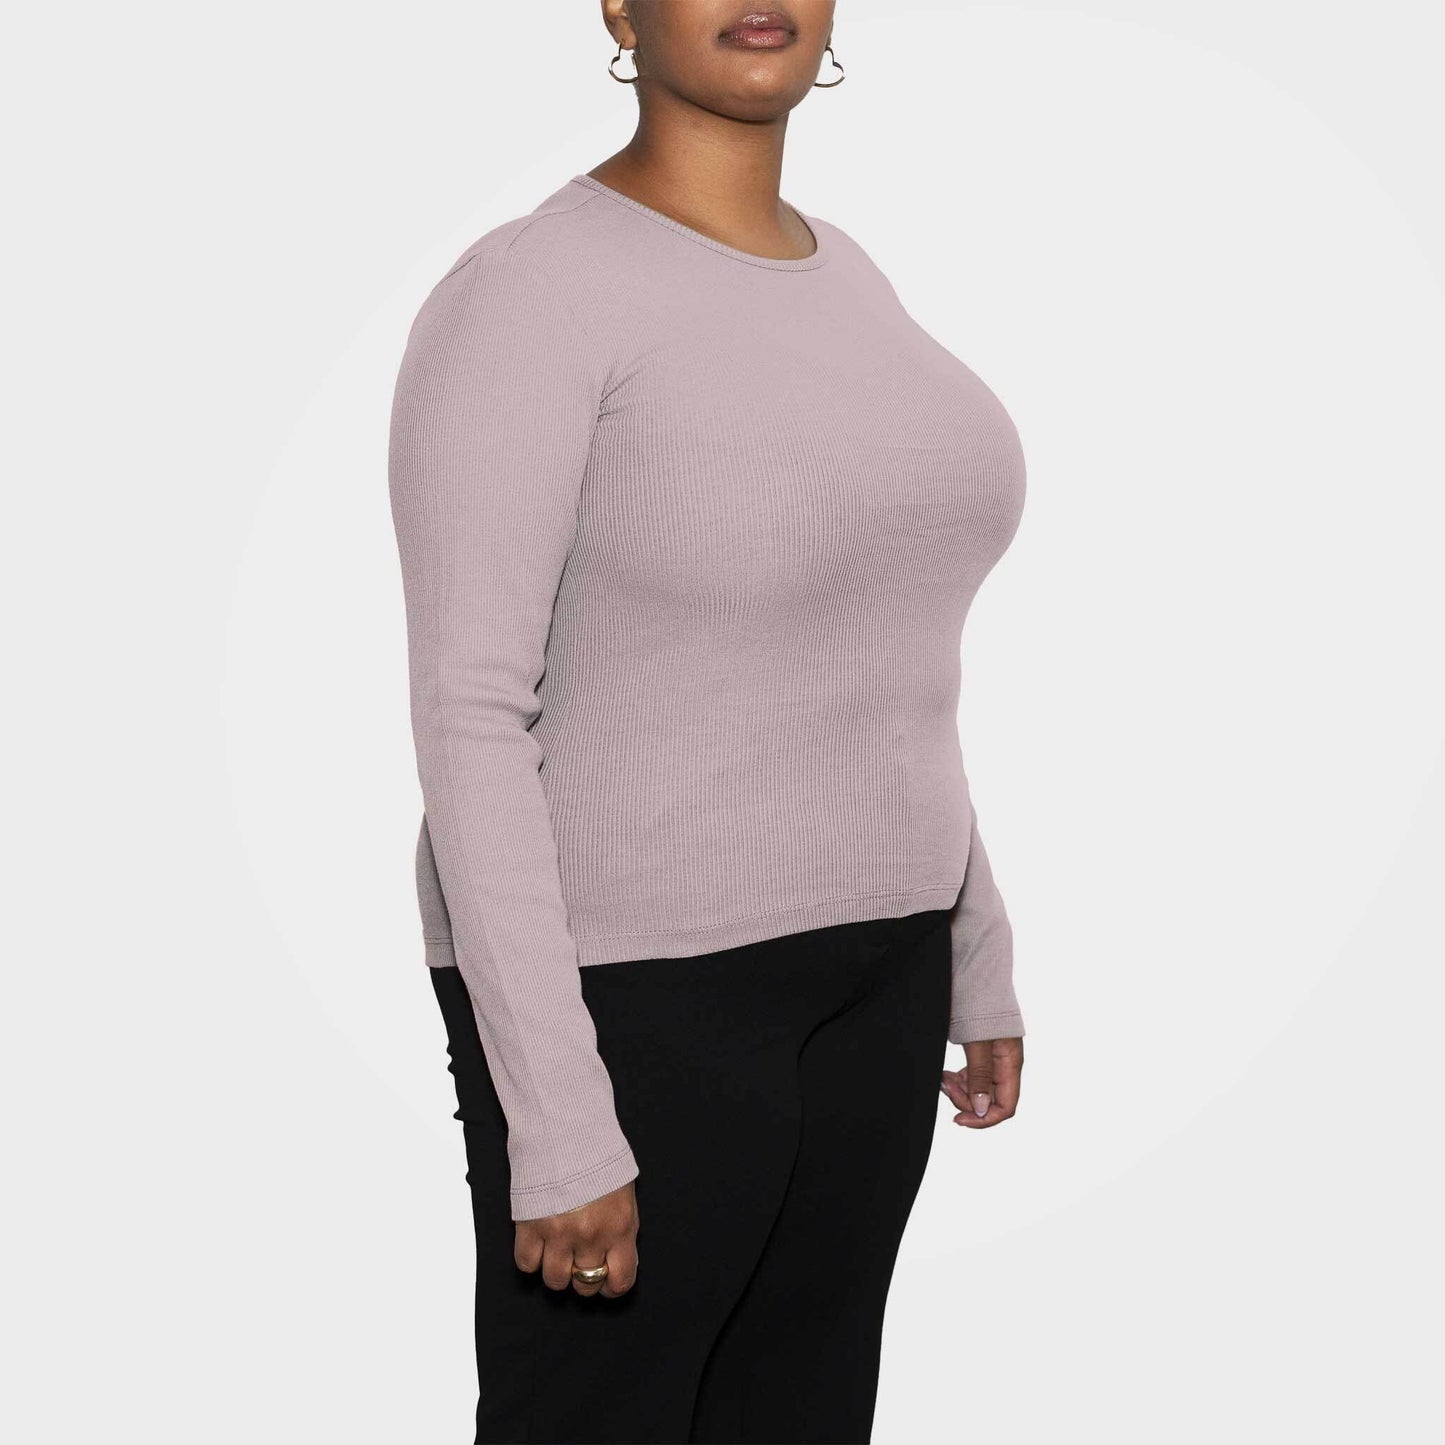 Women’s Recycled Cotton Rib Long Sleeve Top, Sand